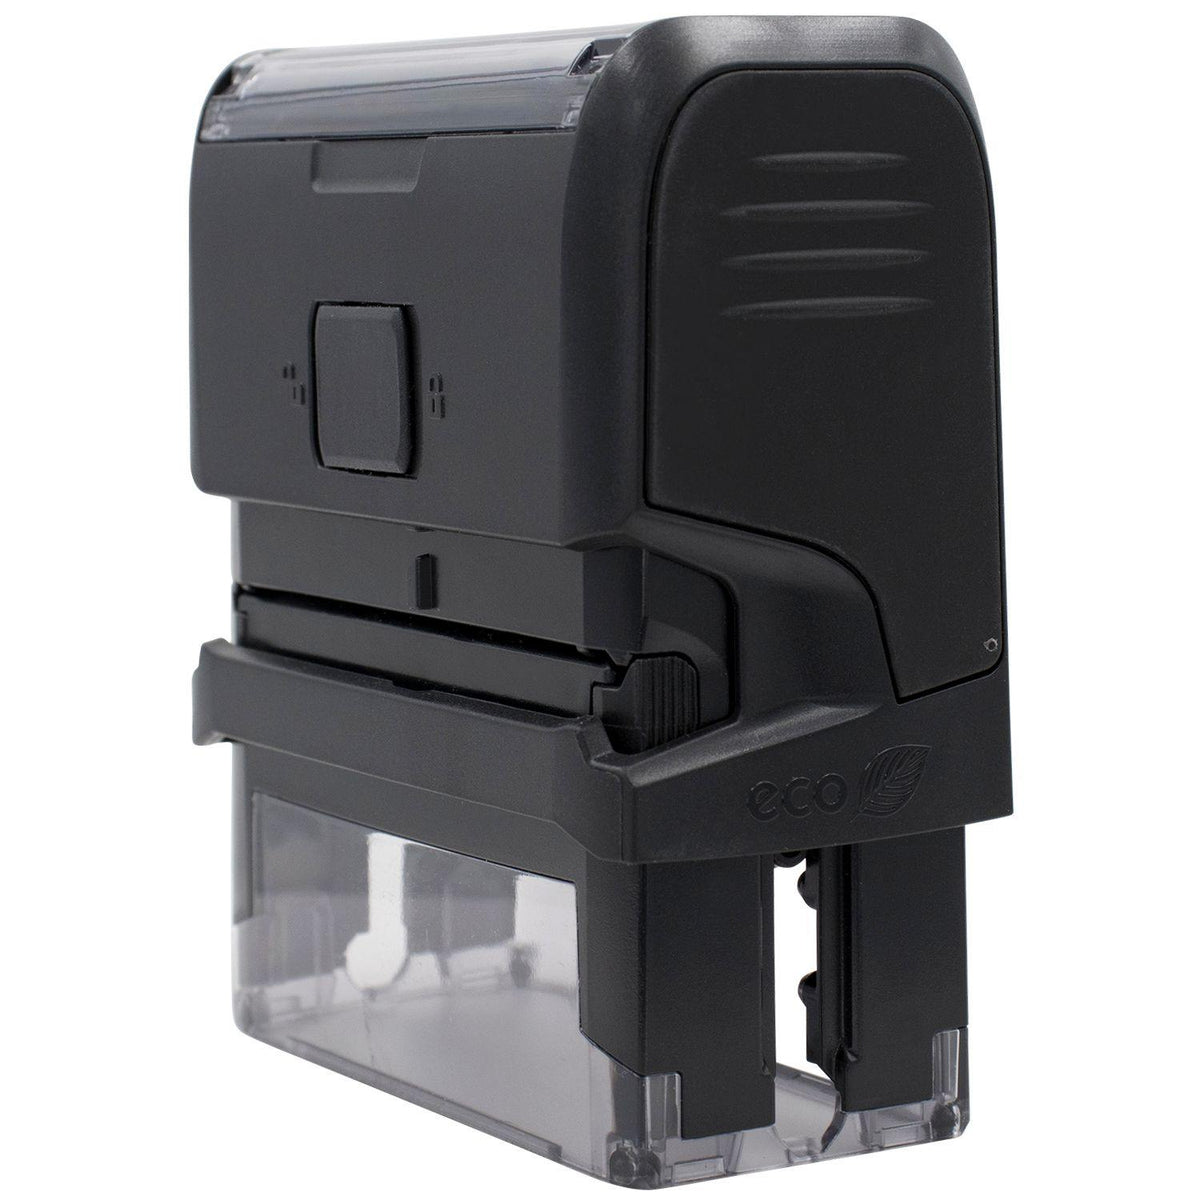 Side View of Large Self-Inking Check Your Work Stamp at an Angle